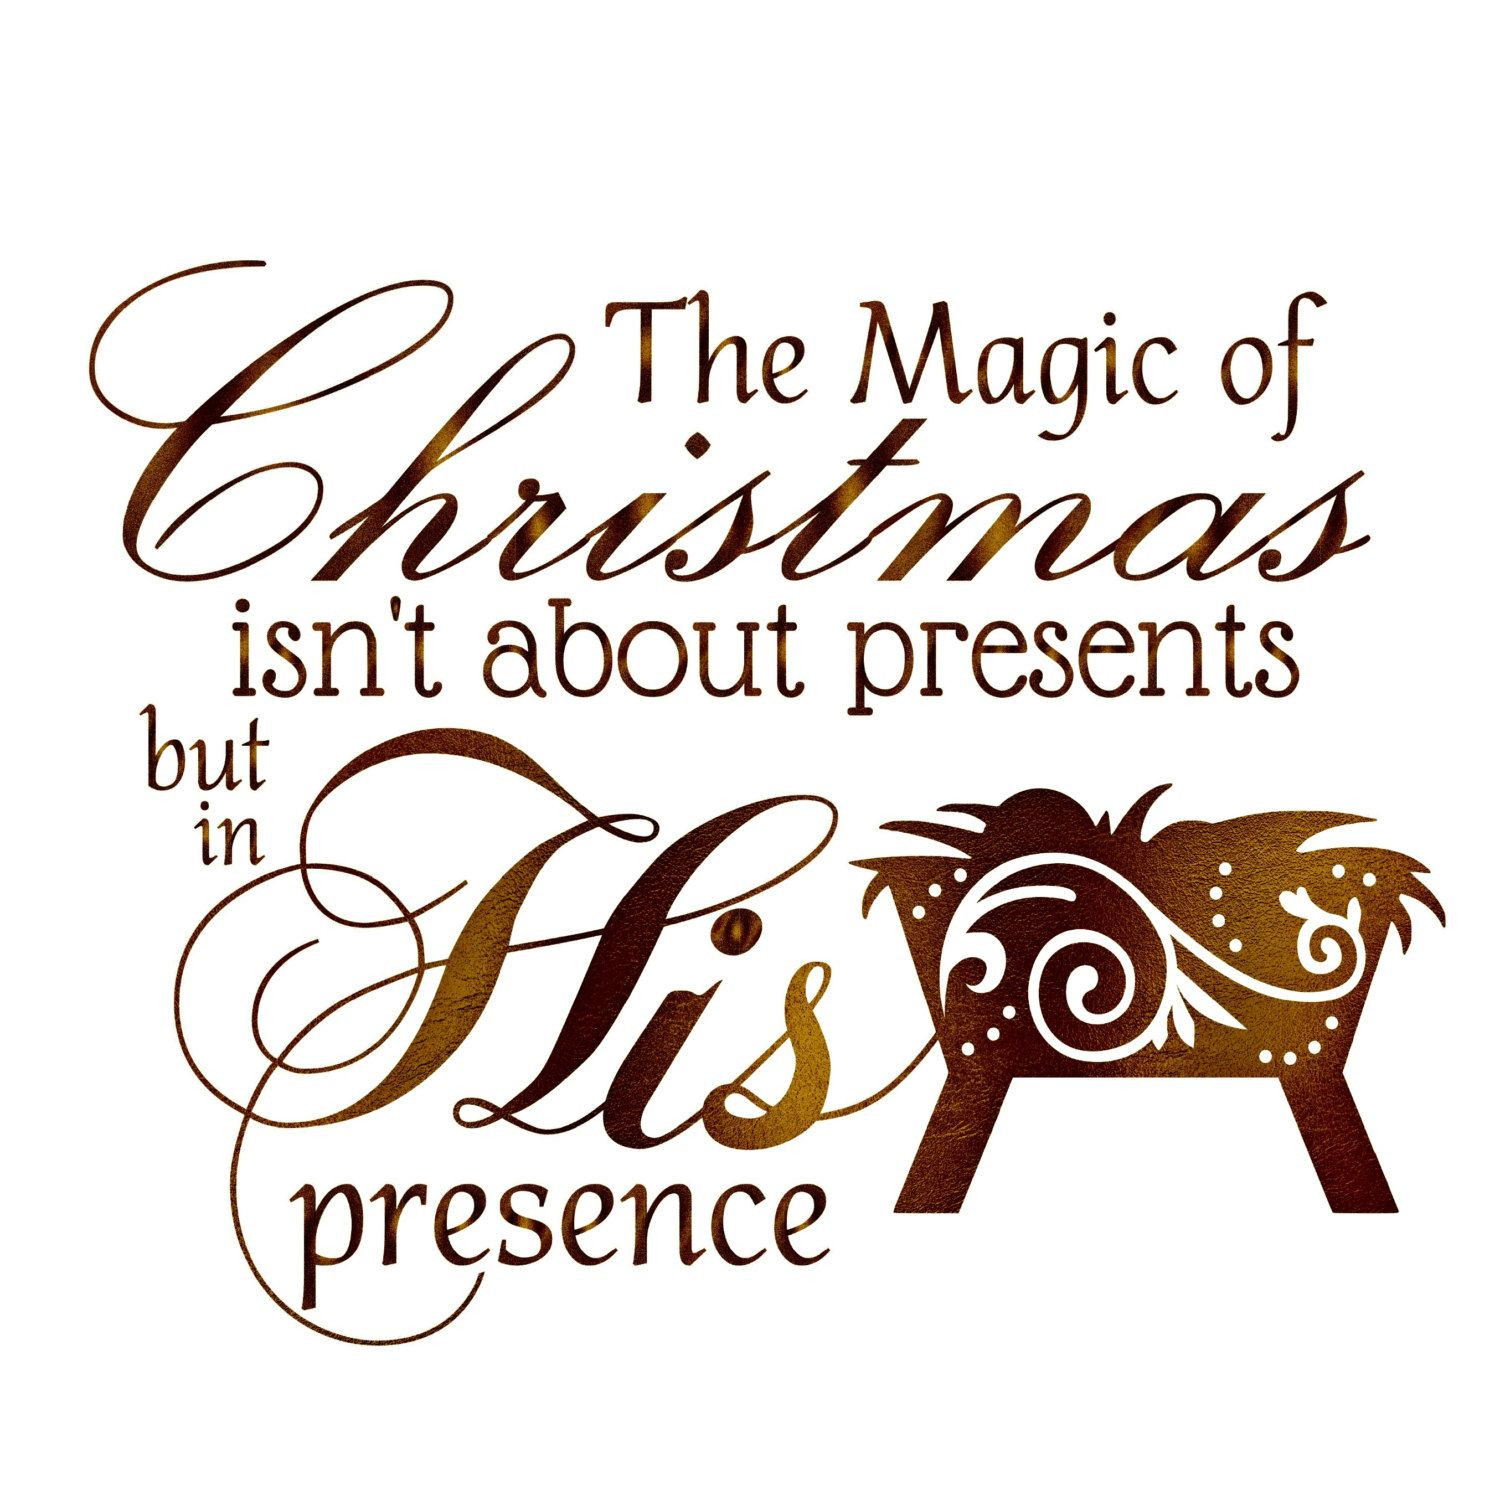 Magic Of Christmas Quotes
 The Magic of Christmas isn t about presents but in His